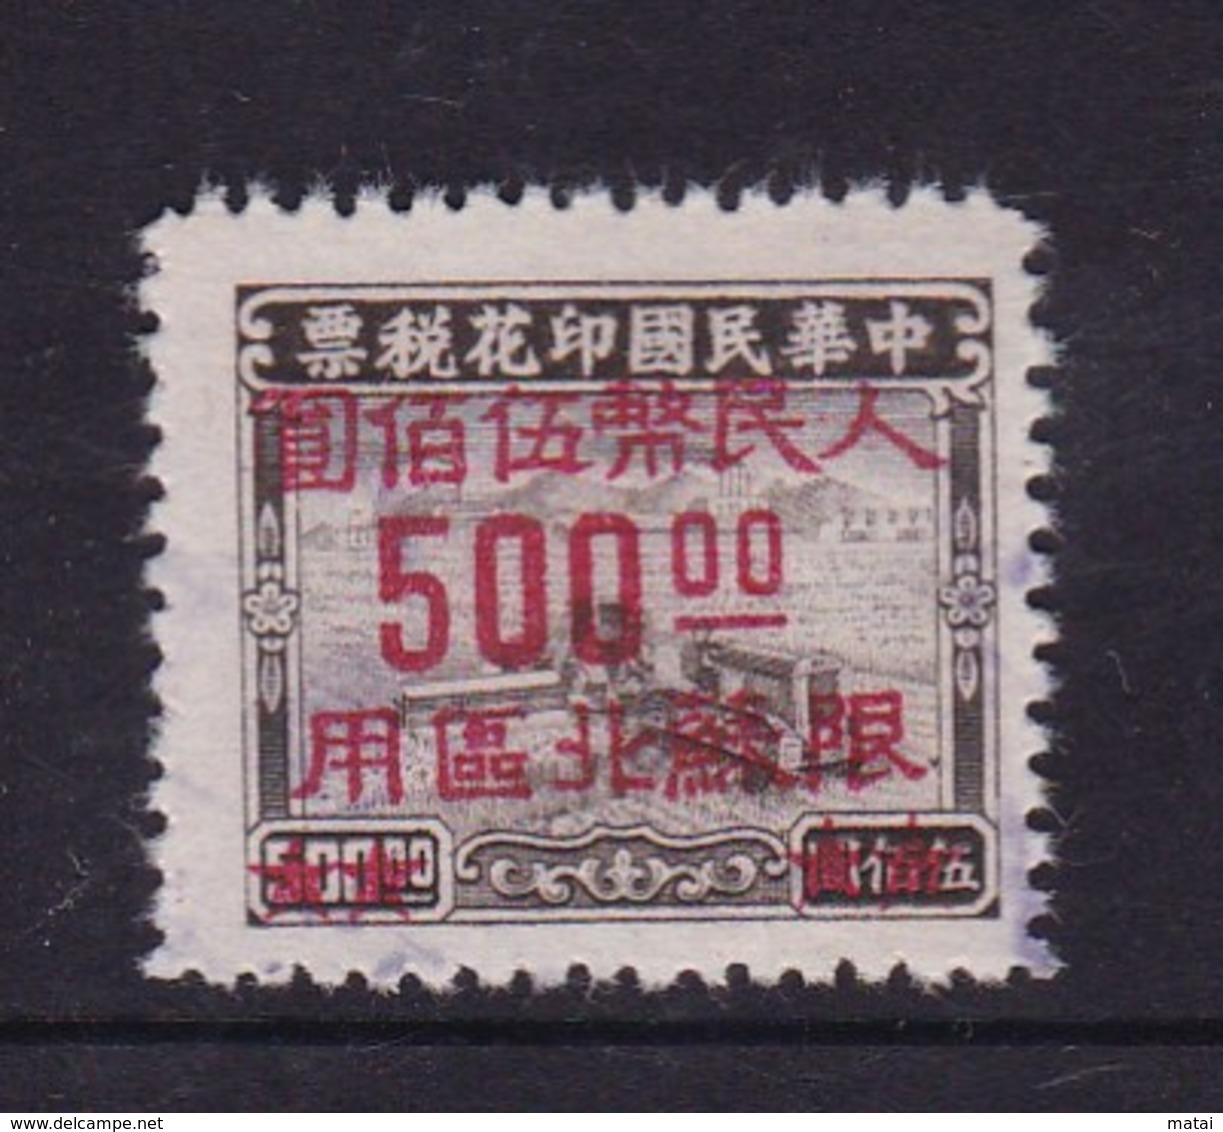 CHINA CHINE CINA  USED LIMITED TO NORTH JIANGSU  REVENUE FISCAL  STAMP RARE!! - Chine Centrale 1948-49